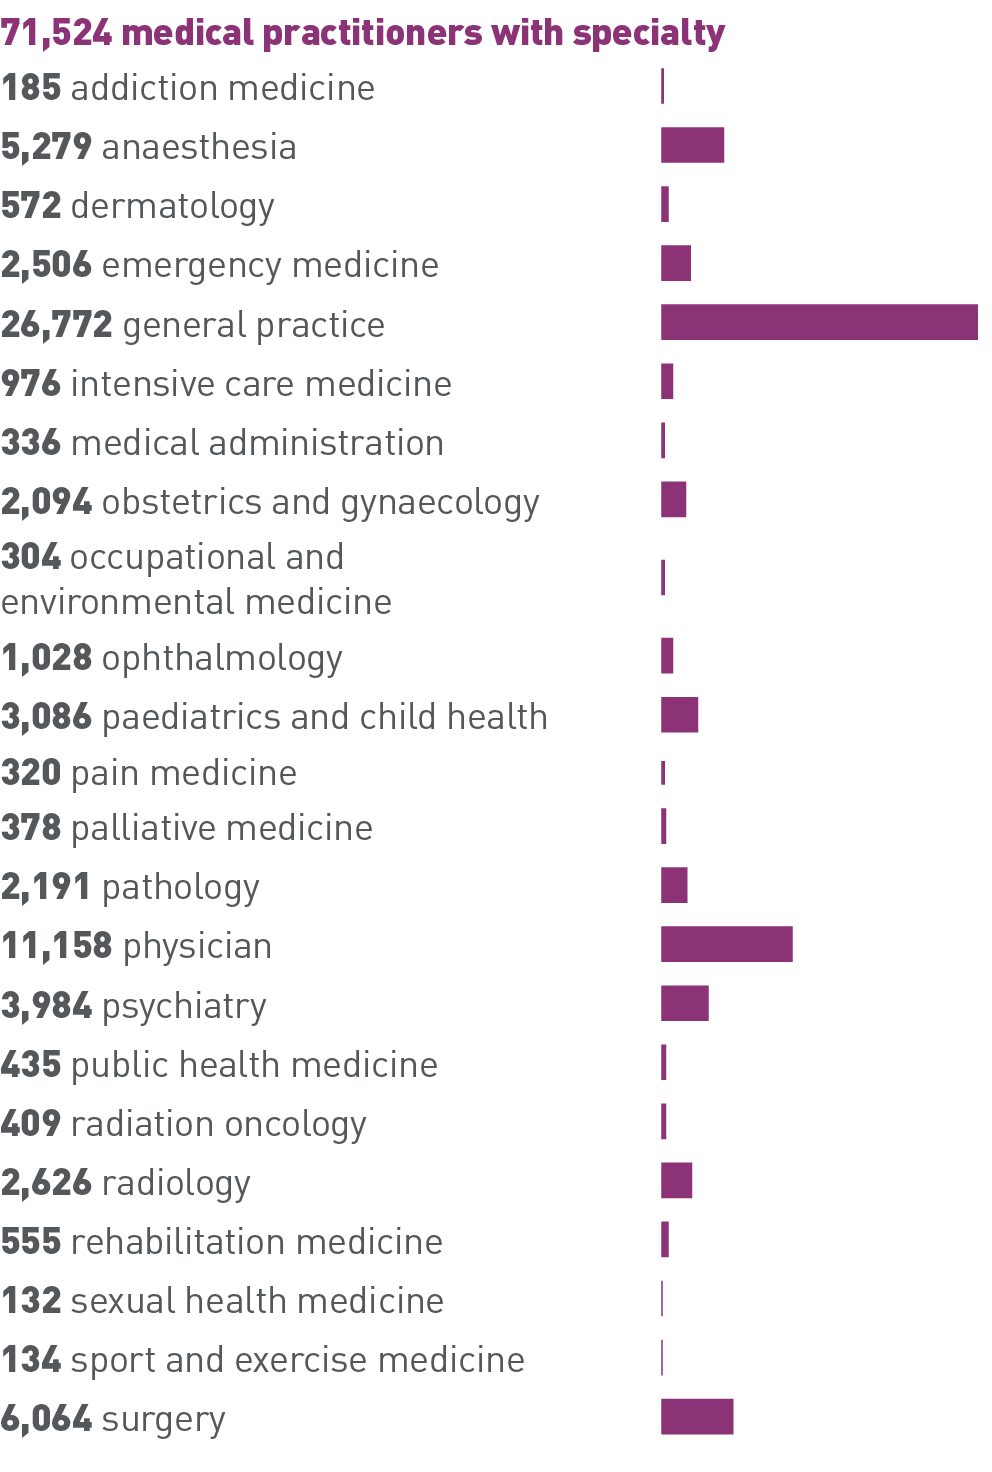 71,524 medical practitioners with specialty, 185 addiction medicine, 5,279 anaesthesia, 572 dermatology, 2,506 emergency medicine, 26,772 general practice,976 intensive care medicine, 336 medical administration, 2,094 obstetrics and gynaecology, 304 occupational and environmental medicine, 1,028 ophthalmology, 3,086 paediatrics and child health, 320 pain medicine, 378 palliative medicine, 2,191 pathology, 11,158 physician, 3,984 psychiatry, 435 public health medicine, 409 radiation oncology, 2,626 radiology, 555 rehabilitation medicine, 132 sexual health medicine, 134 sport and exercise medicine, 6,064 surgery